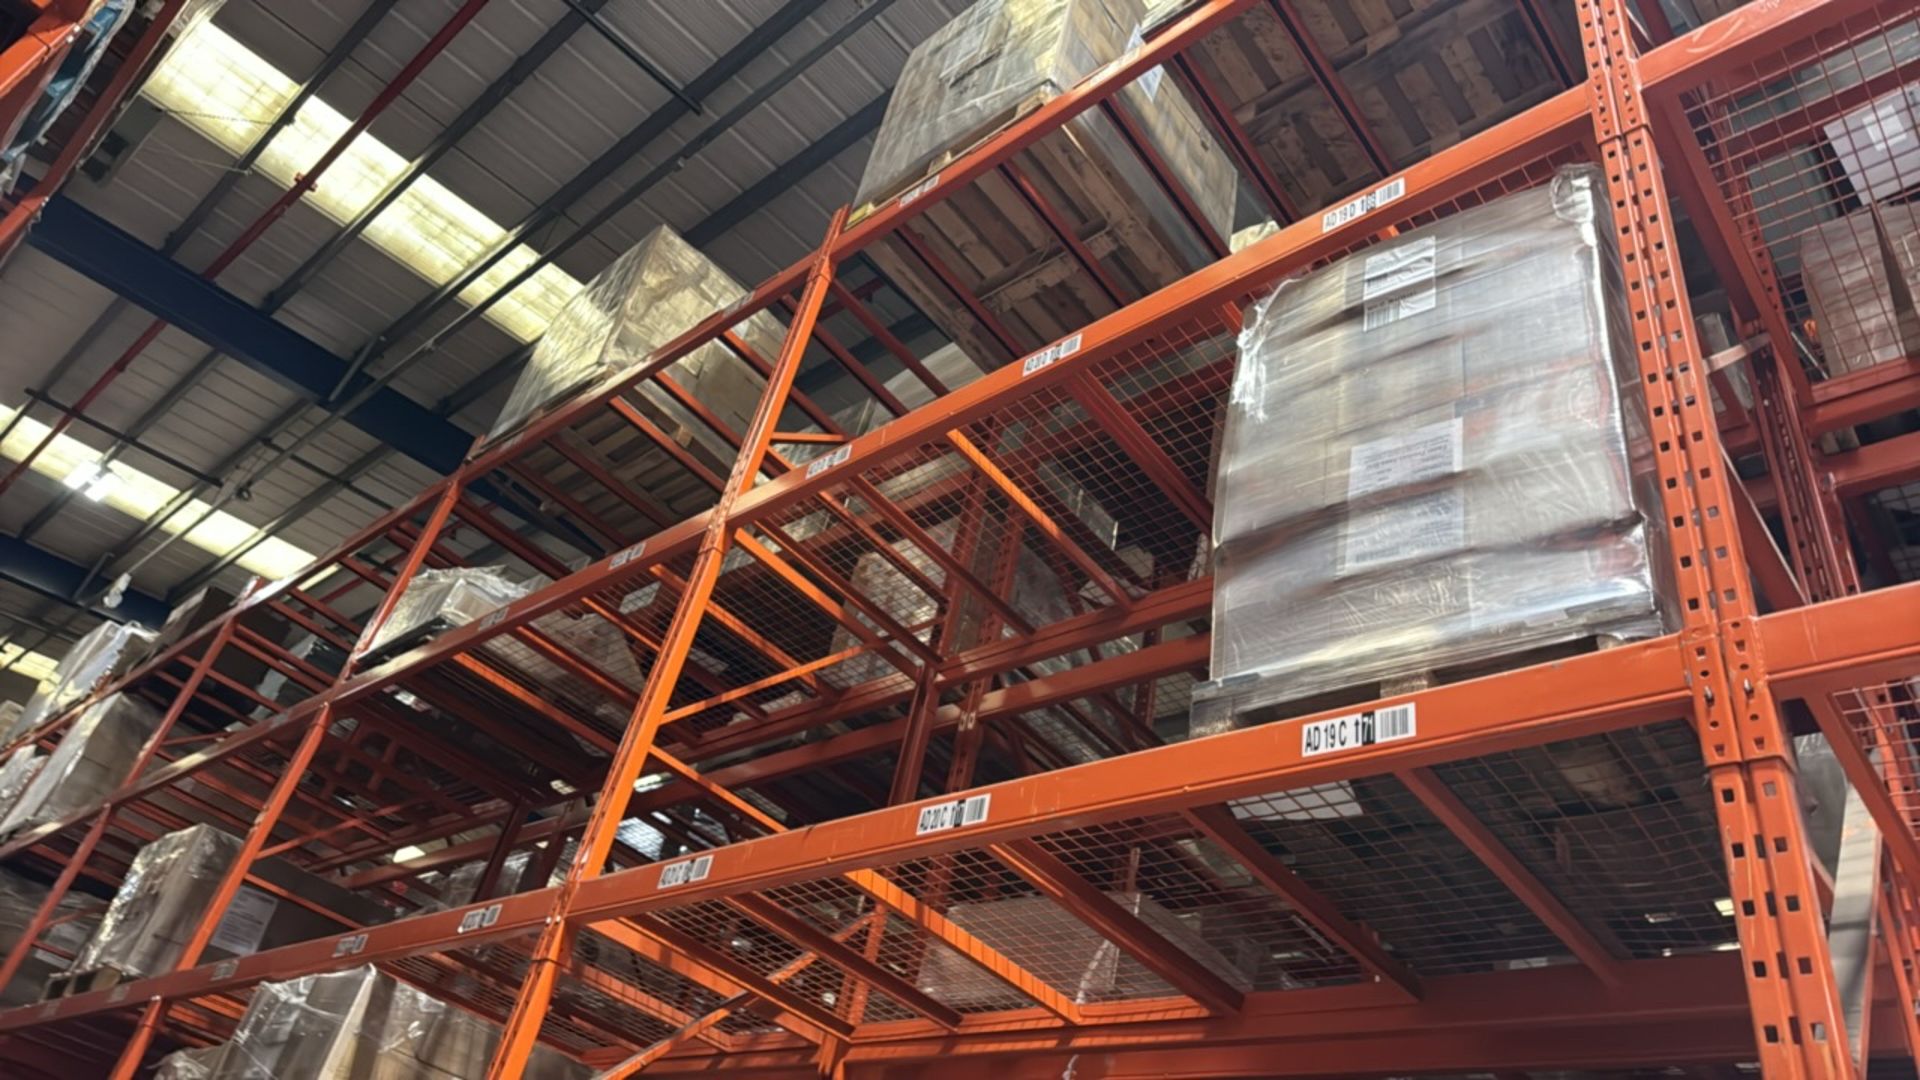 ref 6 - 23 Bays Of Boltless Pallet Racking - Image 8 of 9